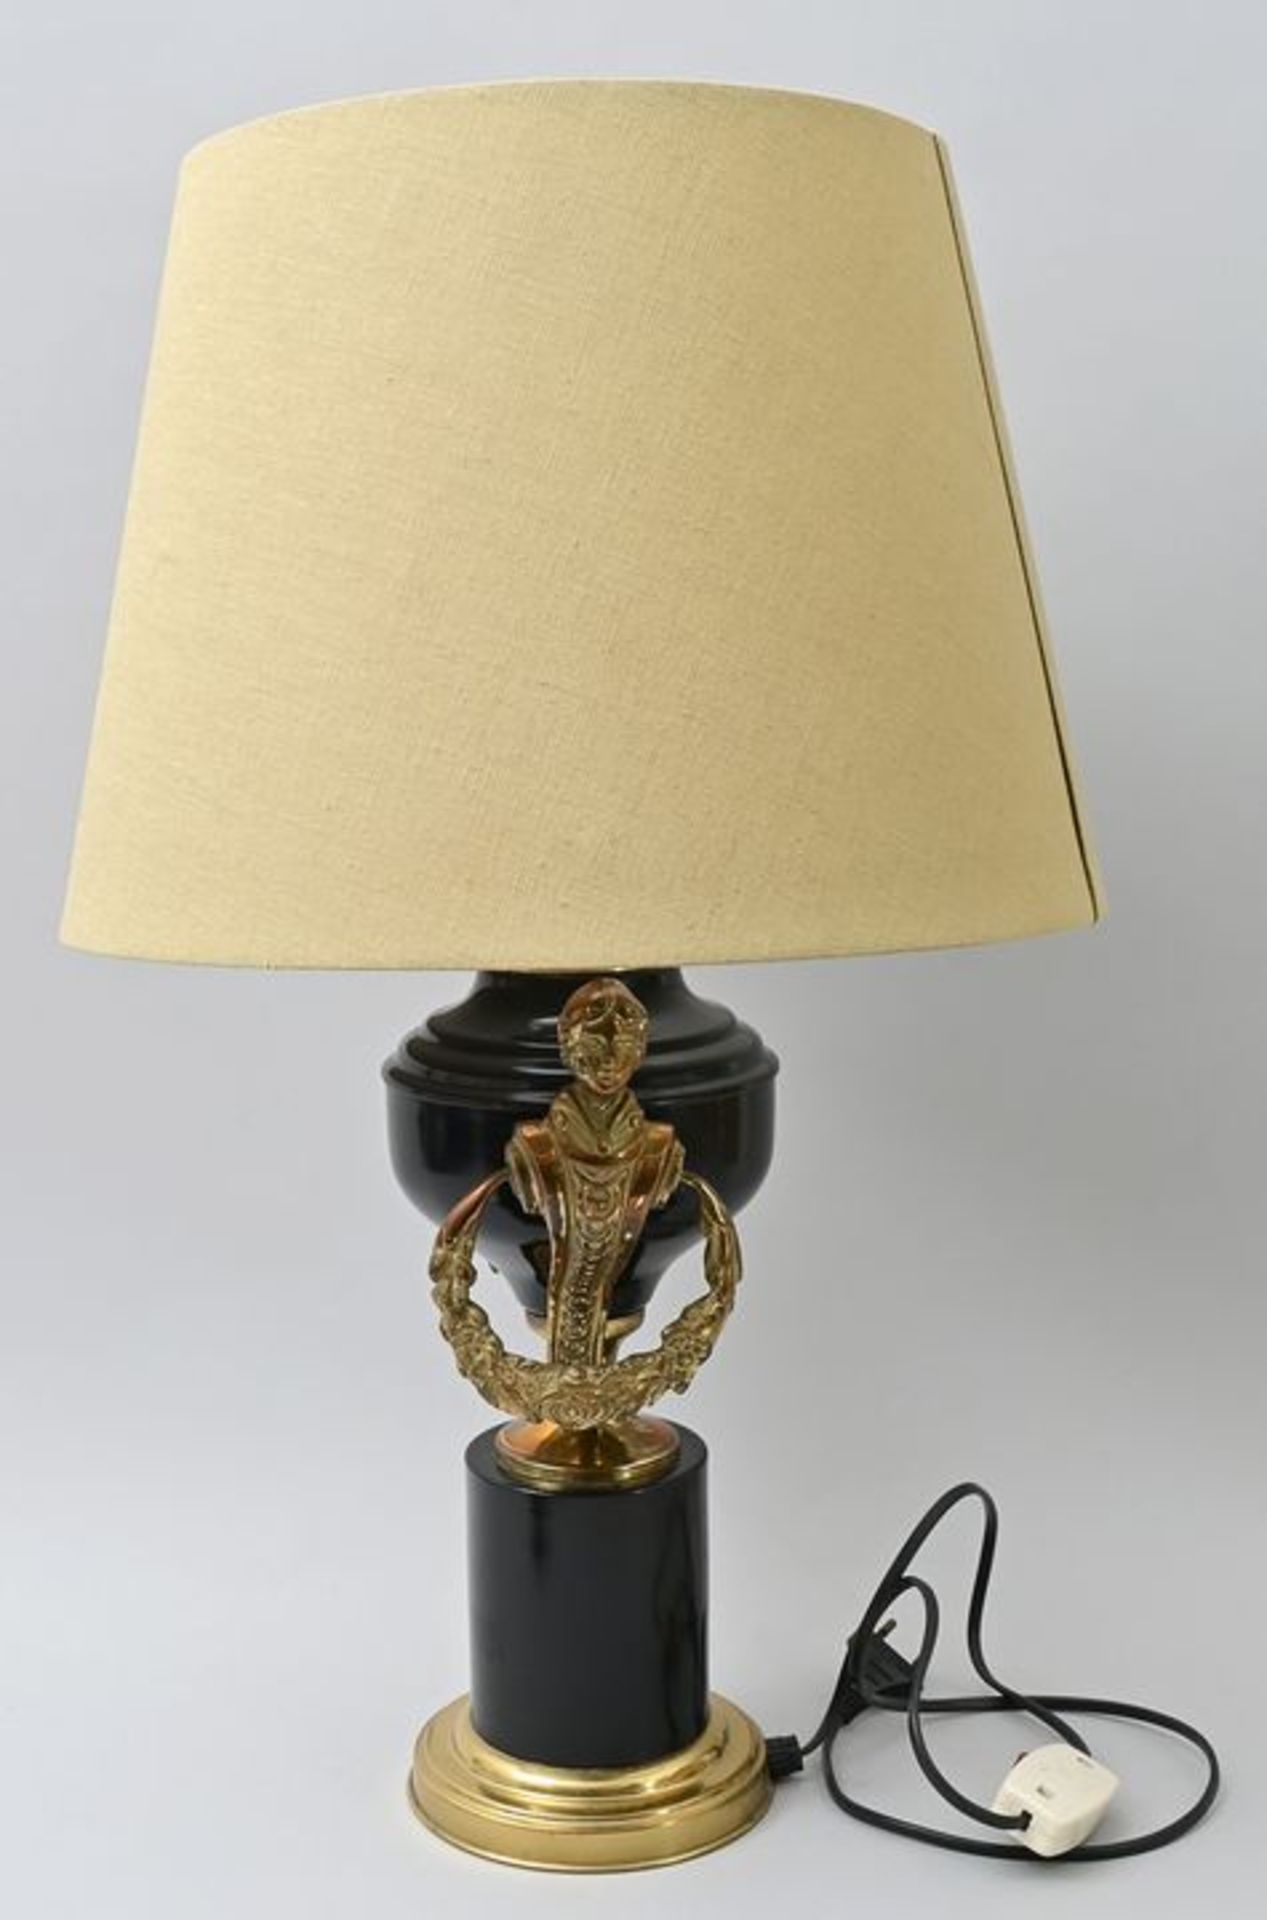 Tischlampe/ table lamp - Image 3 of 3